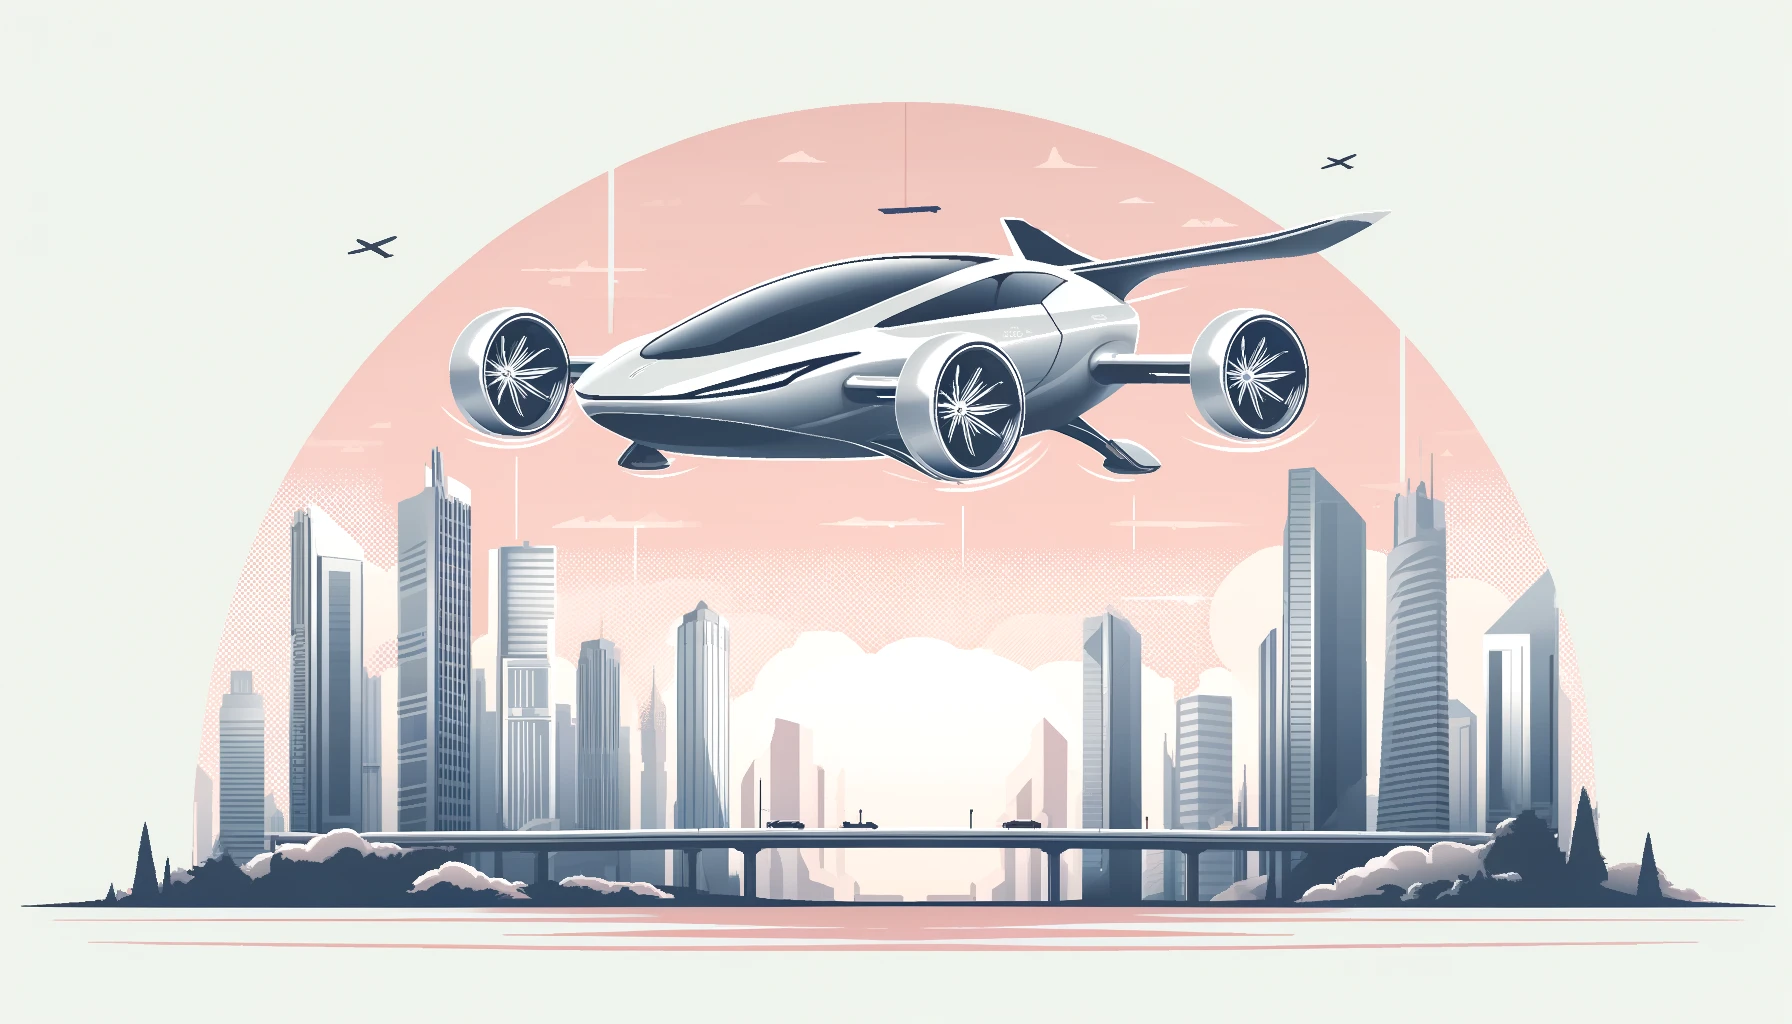 Chinese EV manufacturer Xpeng plans to launch its first flying car by 2026.